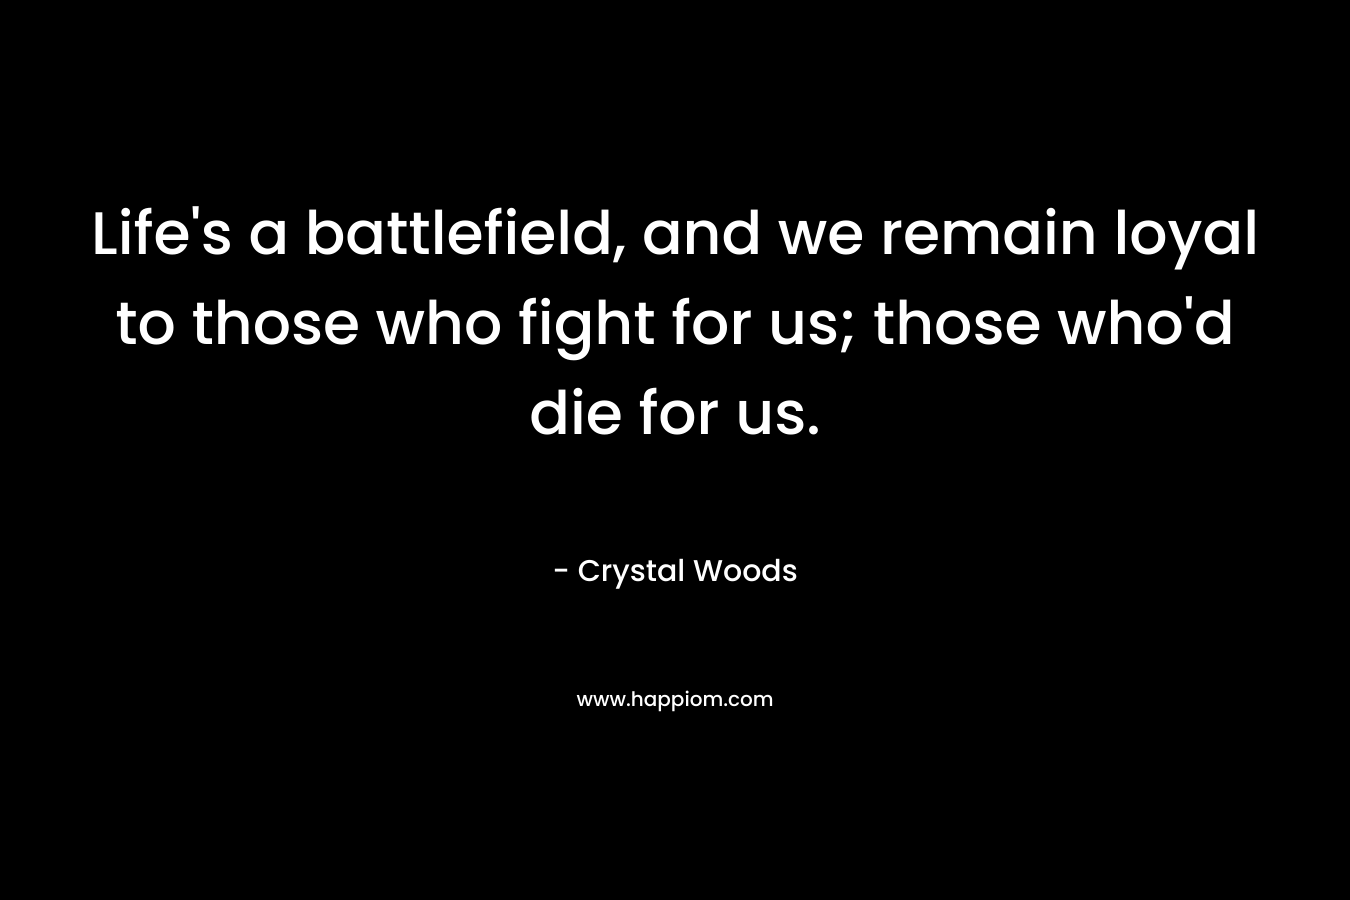 Life’s a battlefield, and we remain loyal to those who fight for us; those who’d die for us. – Crystal Woods